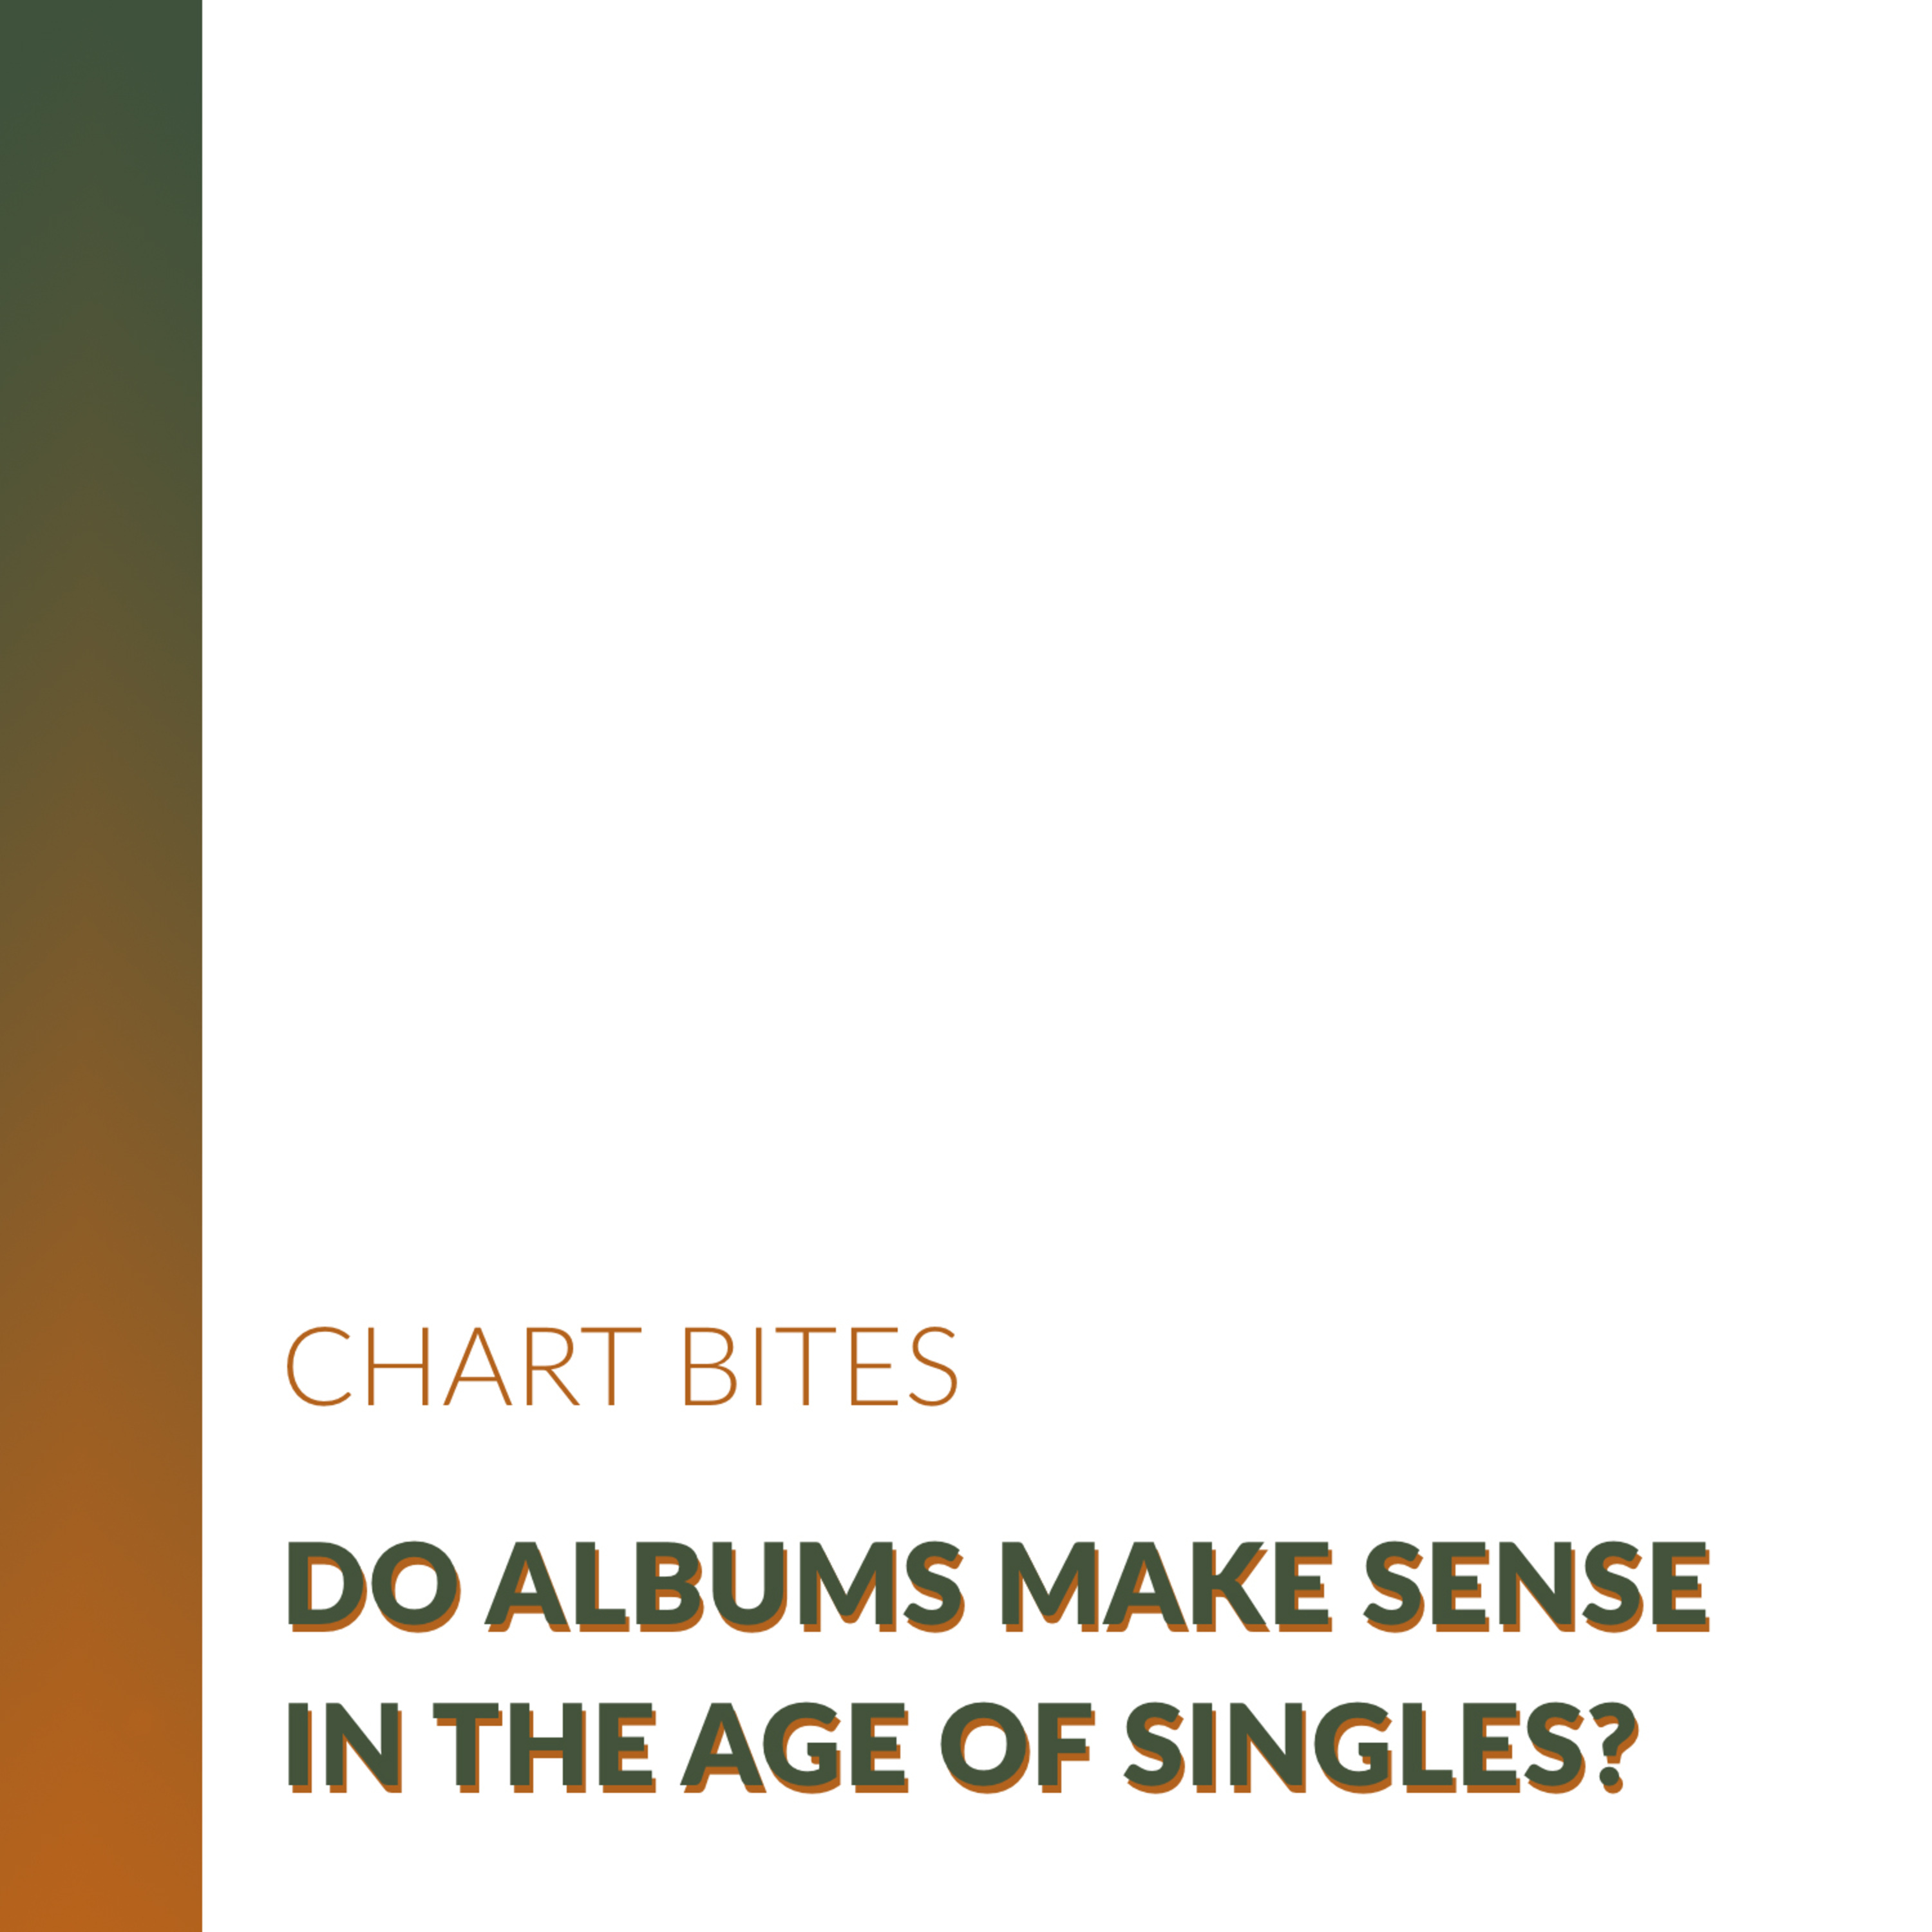 Do albums make business sense in the age of singles?